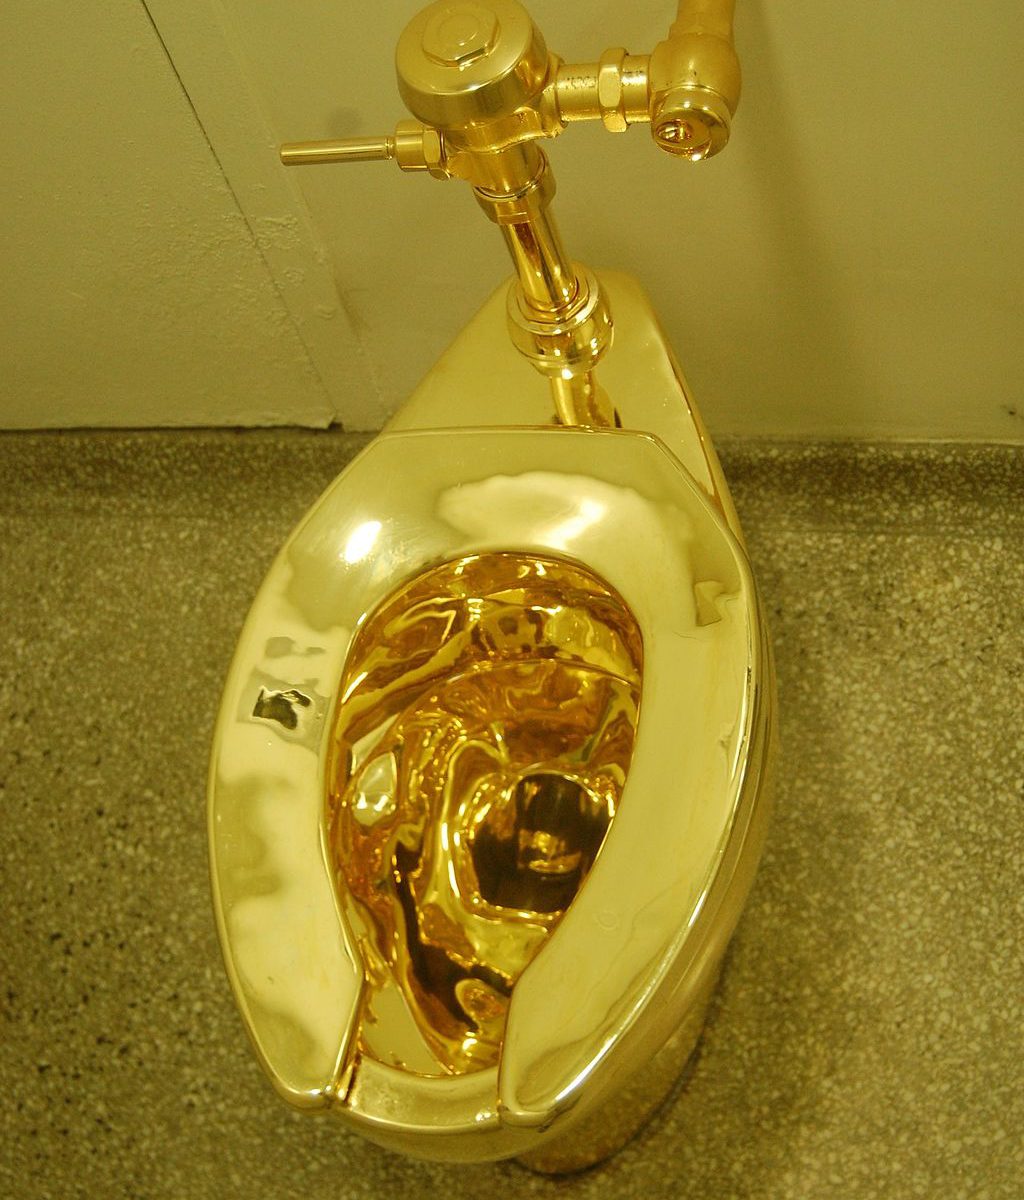 photograph of solid gold toilet America